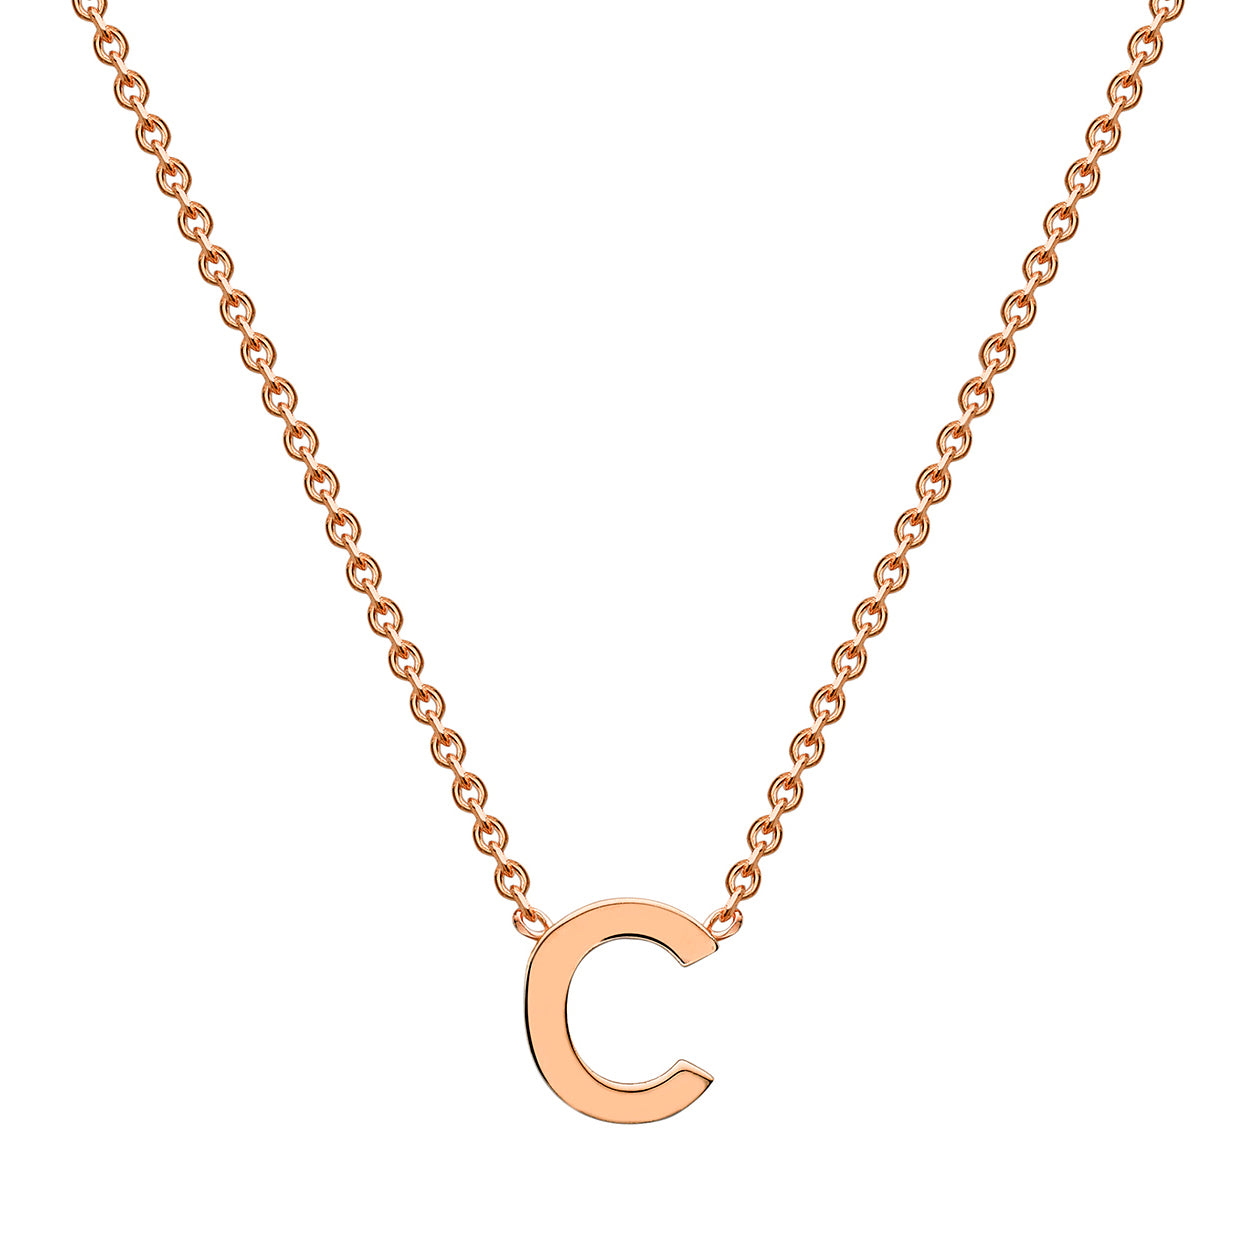 9ct Rose Gold Initial Letter "C" Necklace